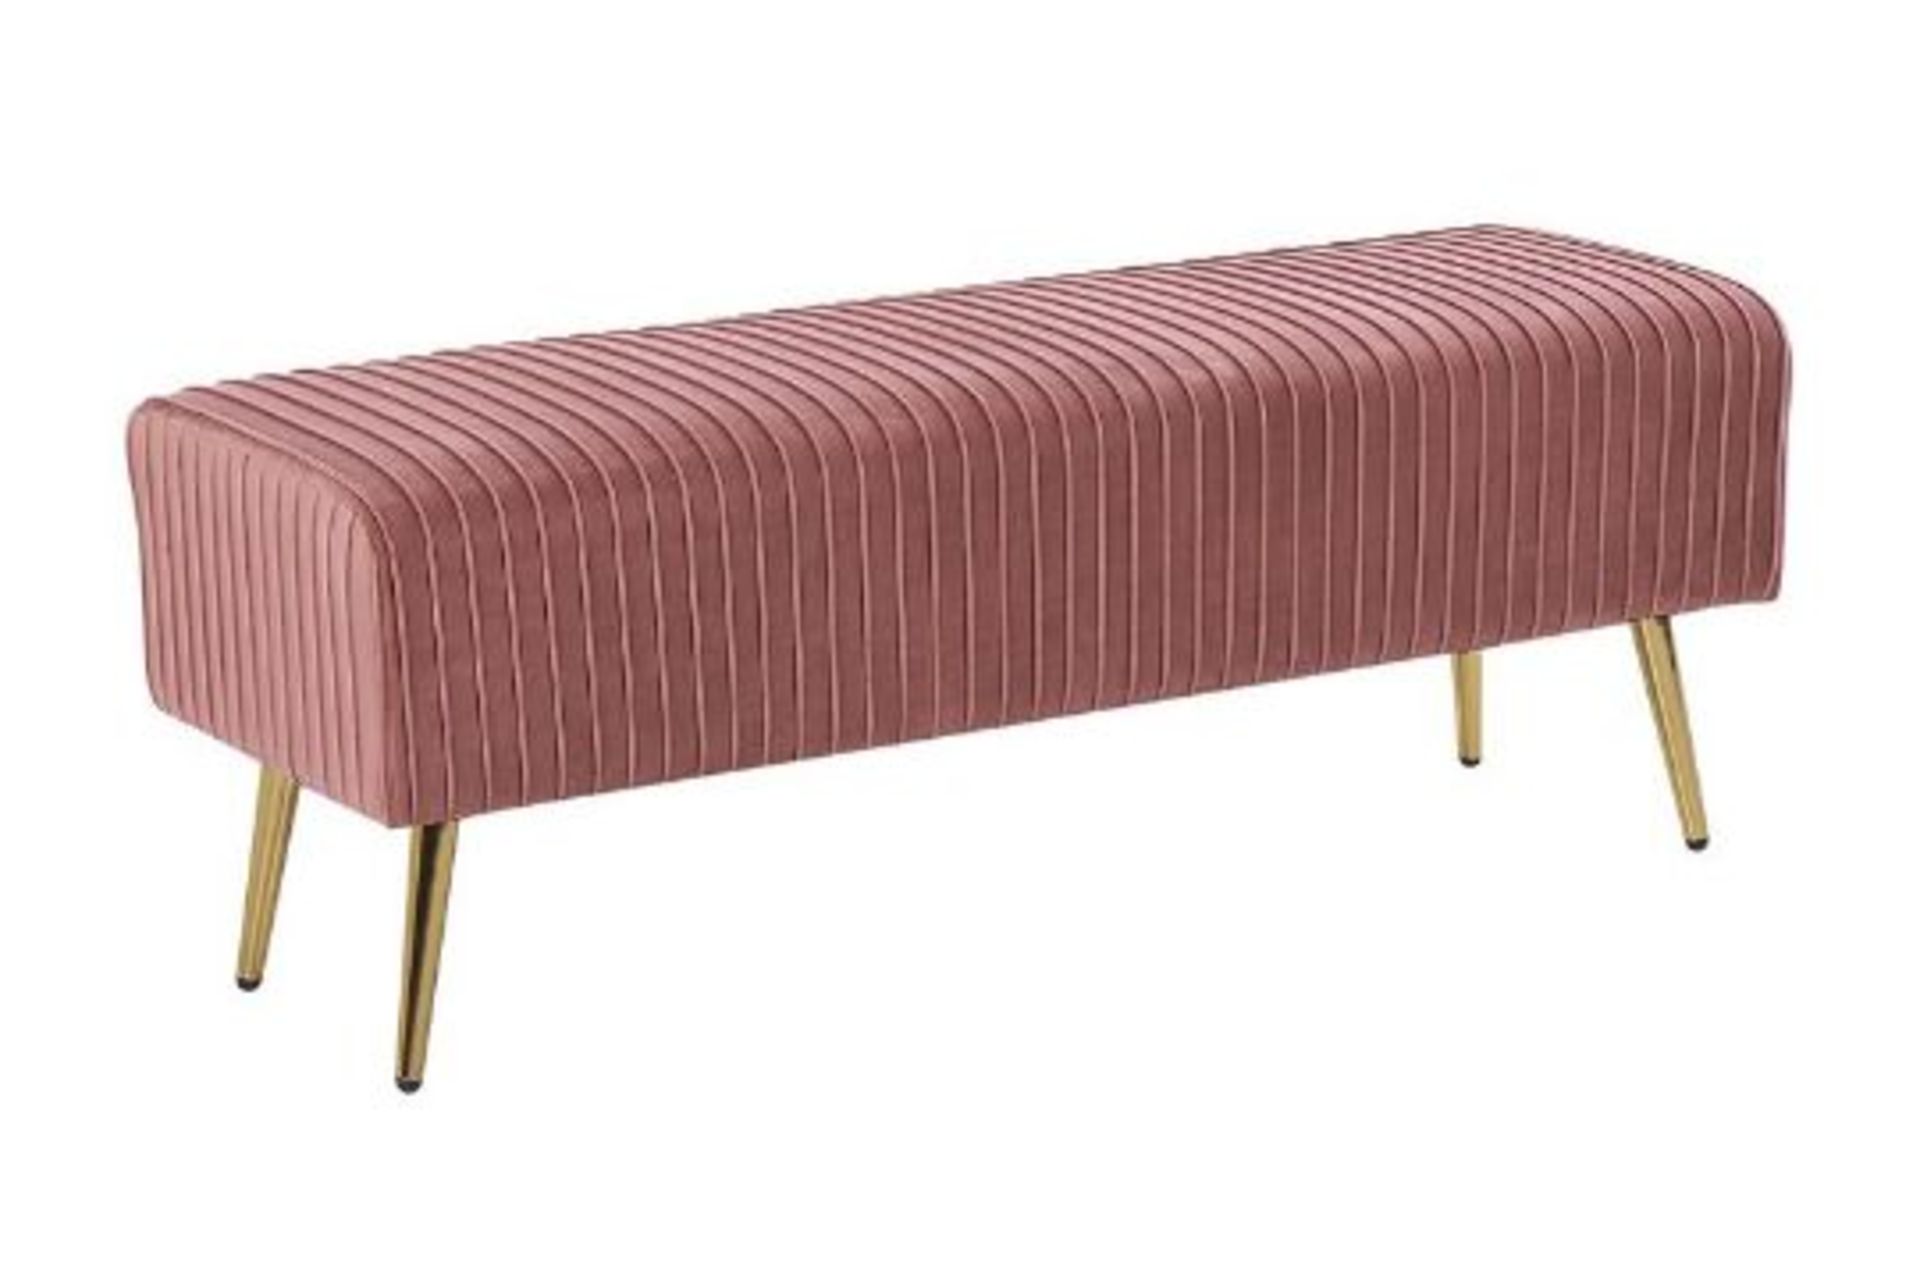 Paterson Velvet Bedroom Bench Pink 7/12. - ER24. RRP £299.99. The functional and chic bench brings a